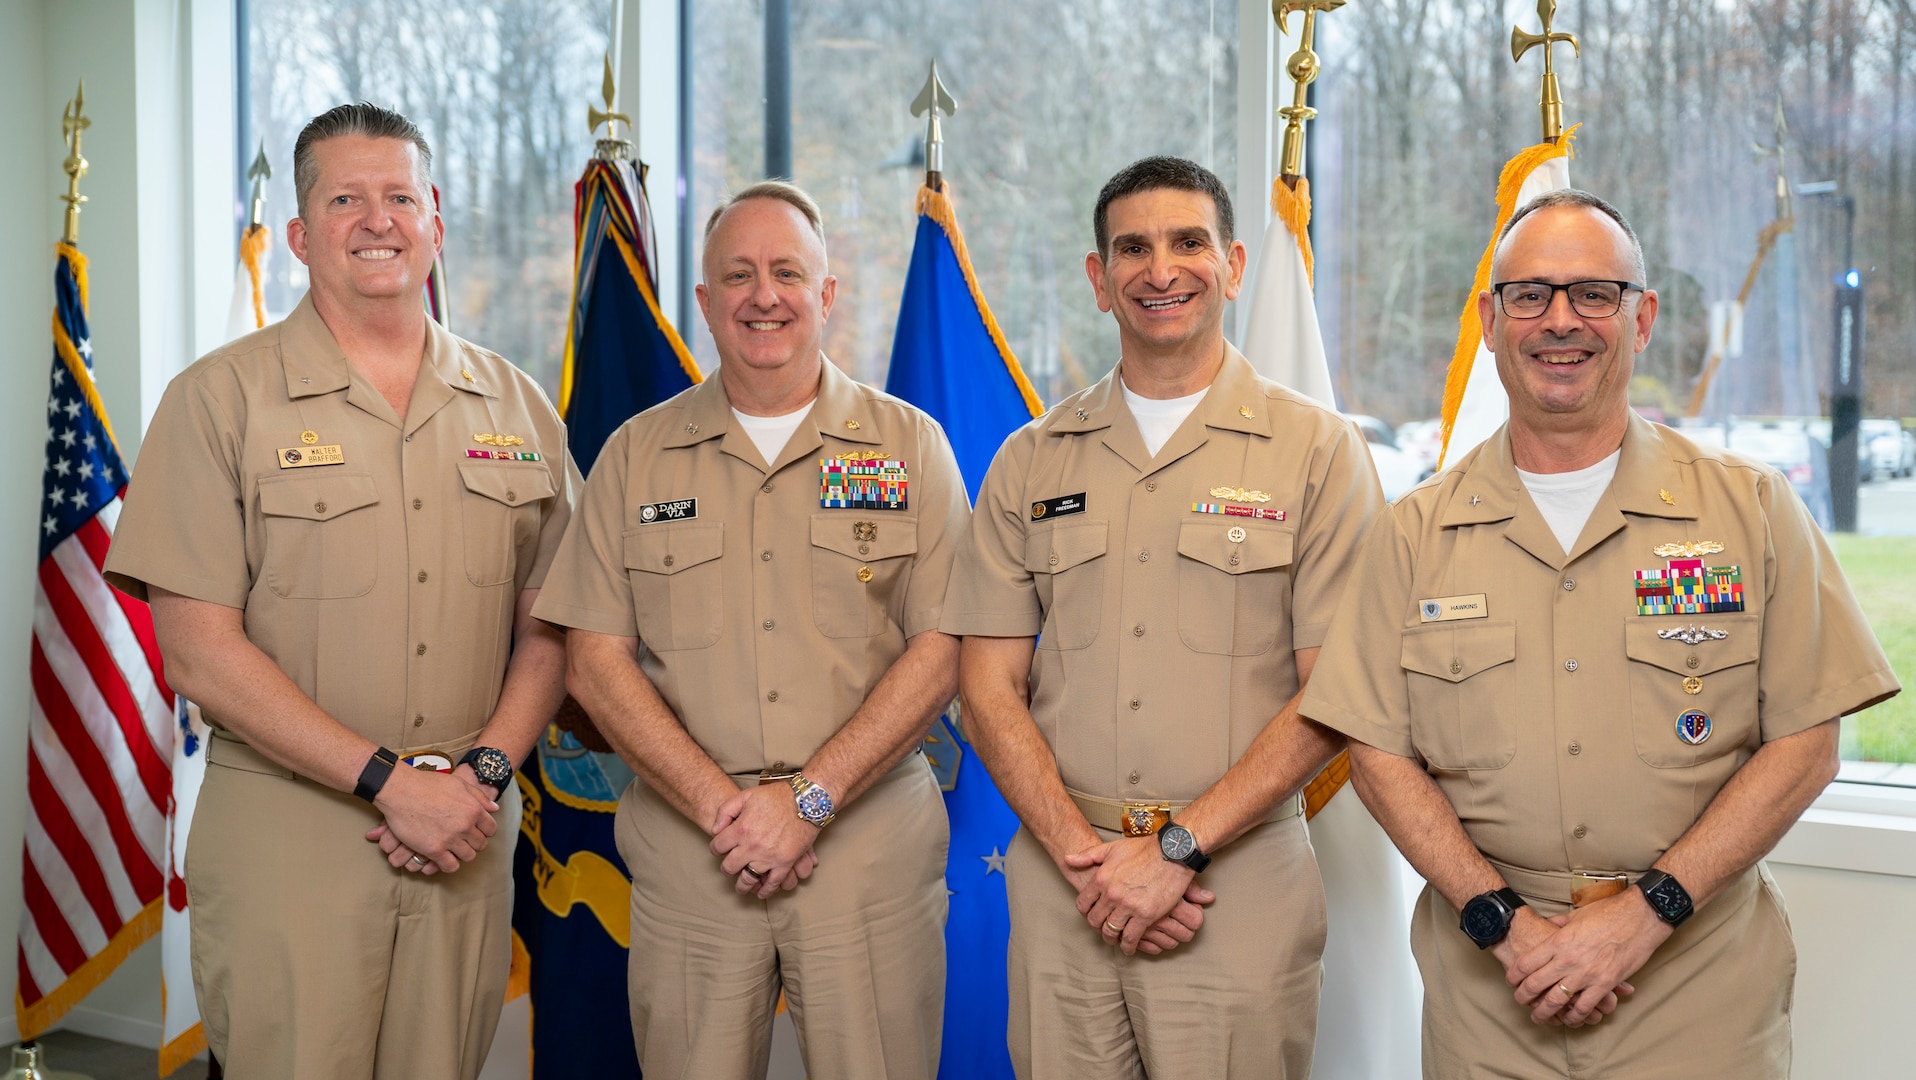 From left to right, Rear Adm. Walter Brafford, Chief of the Navy Dental Corps, commander of Naval Medical Forces Support Command (NMFSC), Rear Adm. Darin Via, Navy Surgeon General, Chief of Bureau of Medicine and Surgery (BUMED), Rear Adm. Rick Freedman, Deputy Surgeon General, Deputy Chief of BUMED, and Rear Adm. Robert Hawkins, Director of the Navy Nurse Corps poses for a photo after a group promotion ceremony at BUMED headquarters in Falls Church, Virginia, on December 6, 2023.



Brafford, a native of Lebanon, Missouri; Via, a native of Sullivan, Illinois; Freedman, a native of Philadelphia; and Hawkins a native of Liverpool, New York, received U.S. Senate confirmation in their respective ranks and roles on December 5, 2023.